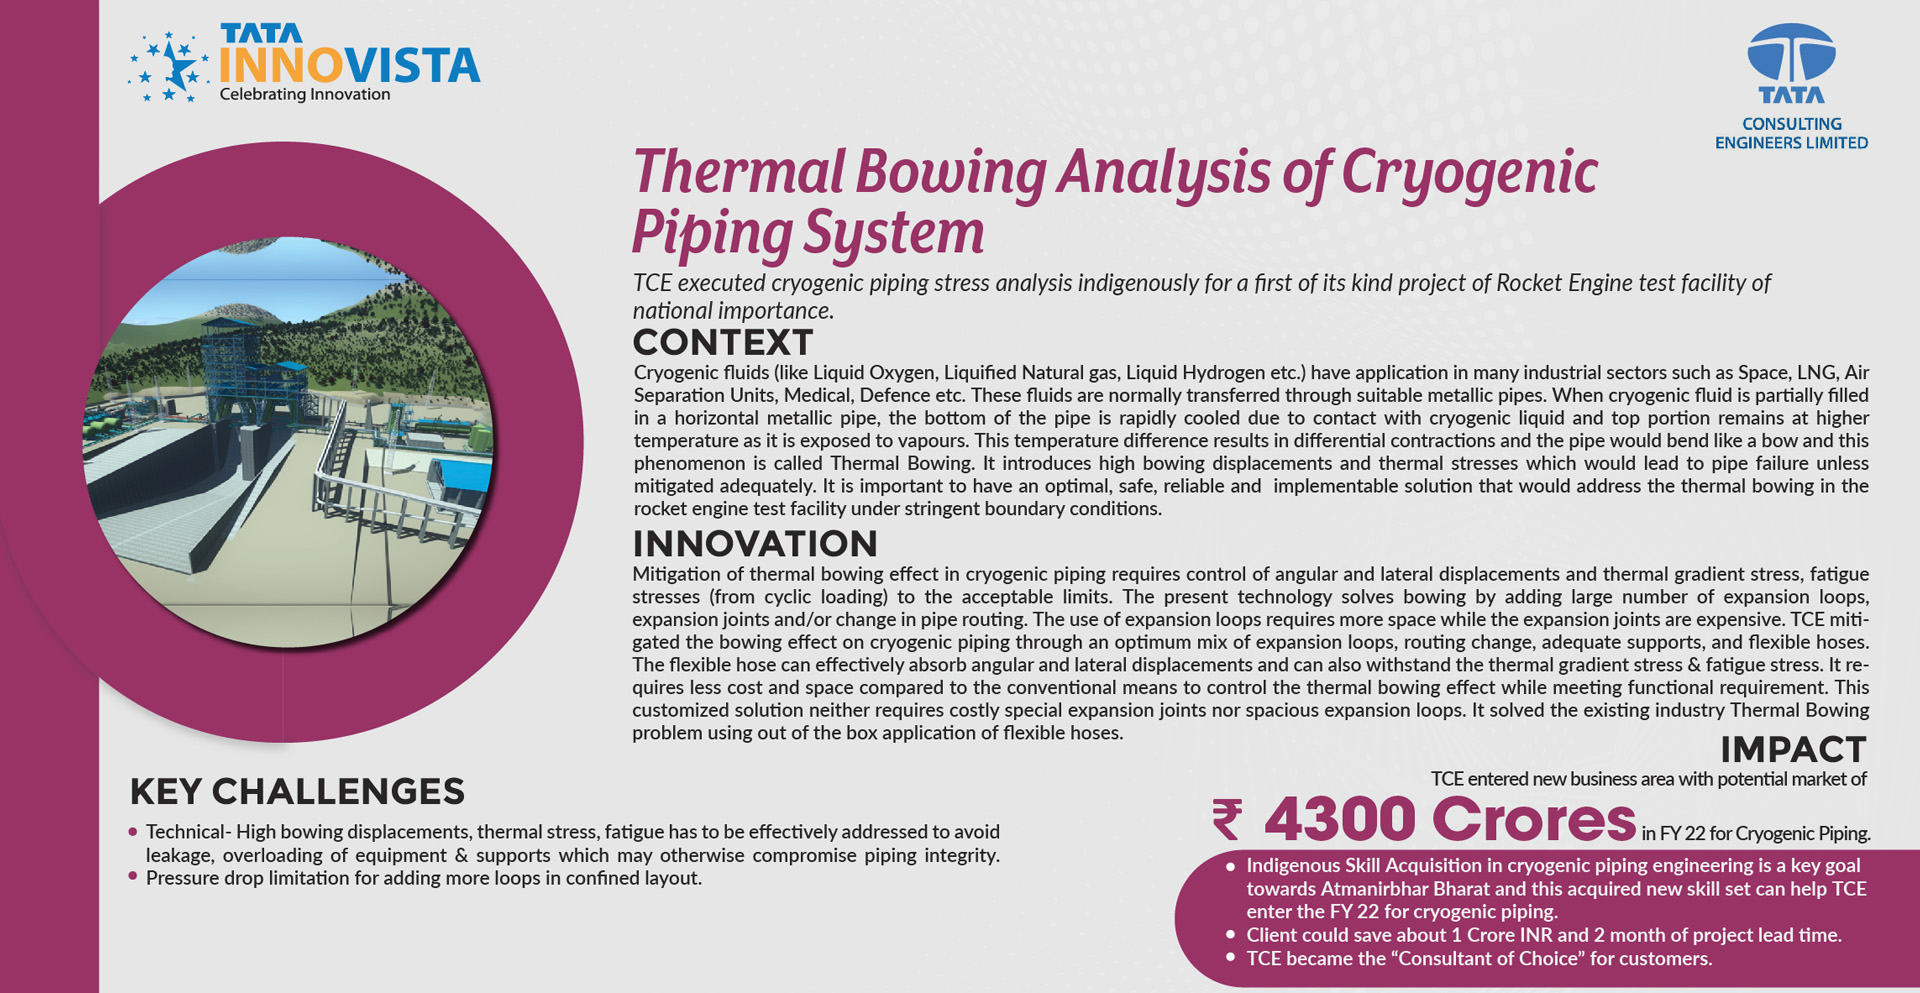 TCE-Thermal Bowing Analysis of Cryogenic Piping System final